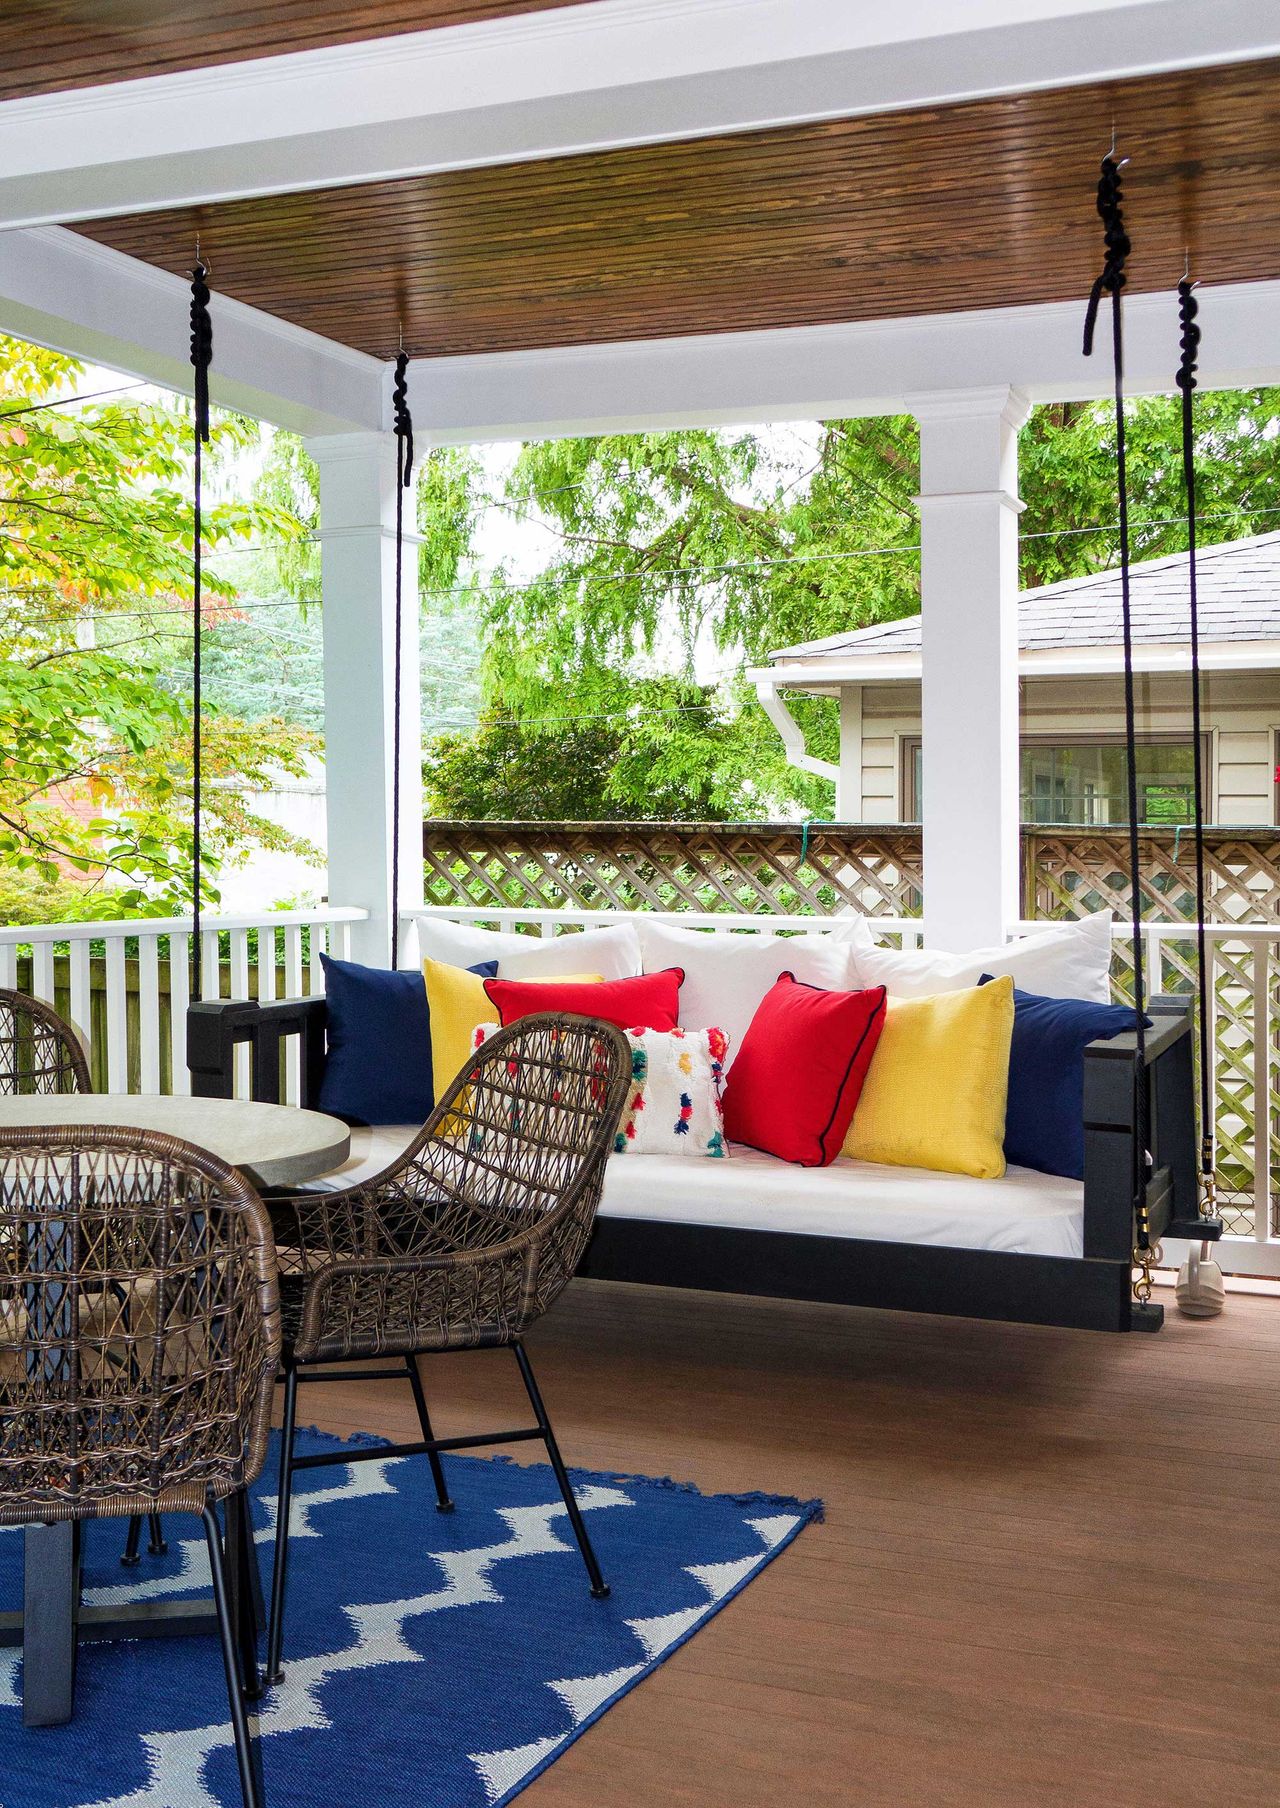 Enclosed patio ideas: 13 ways to cover your seating space for easy ...